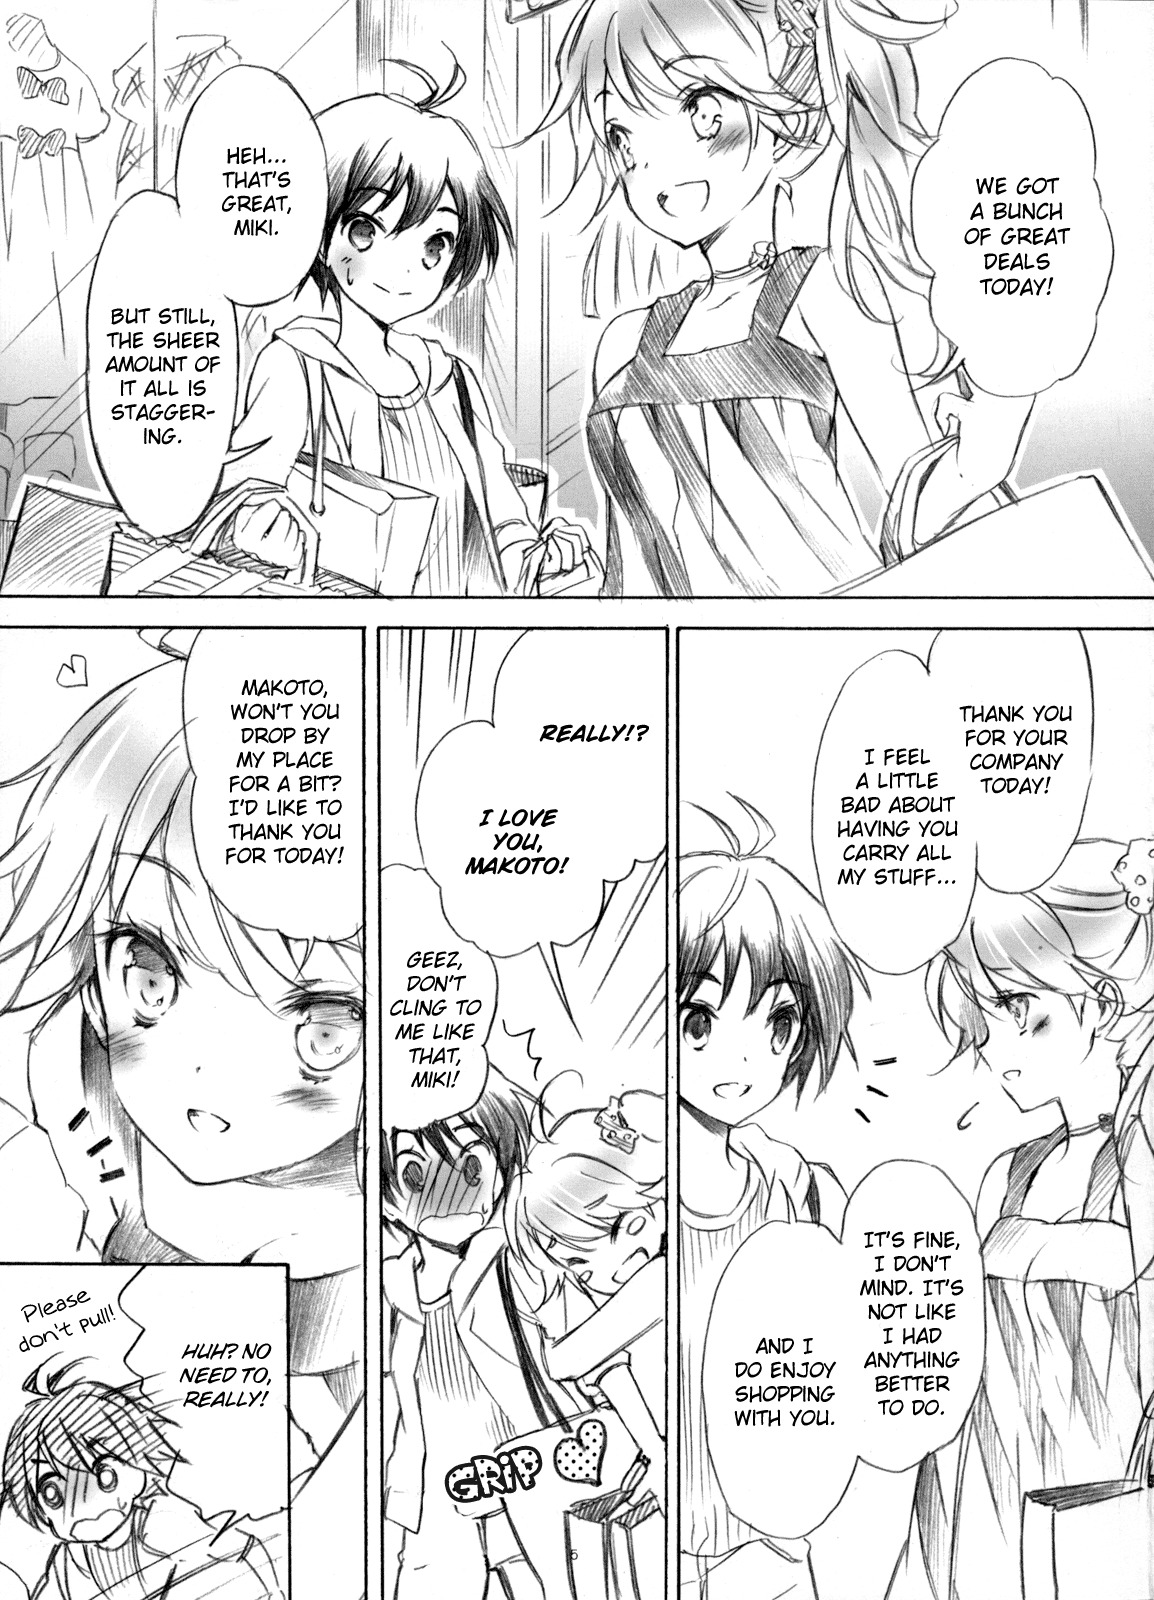 [ONIGIRIZ (CUTEG, Hypar)] IM@Sweets 4 I Want! (THE IDOLM@STER) [English] [yuriproject] [Incomplete] page 4 full